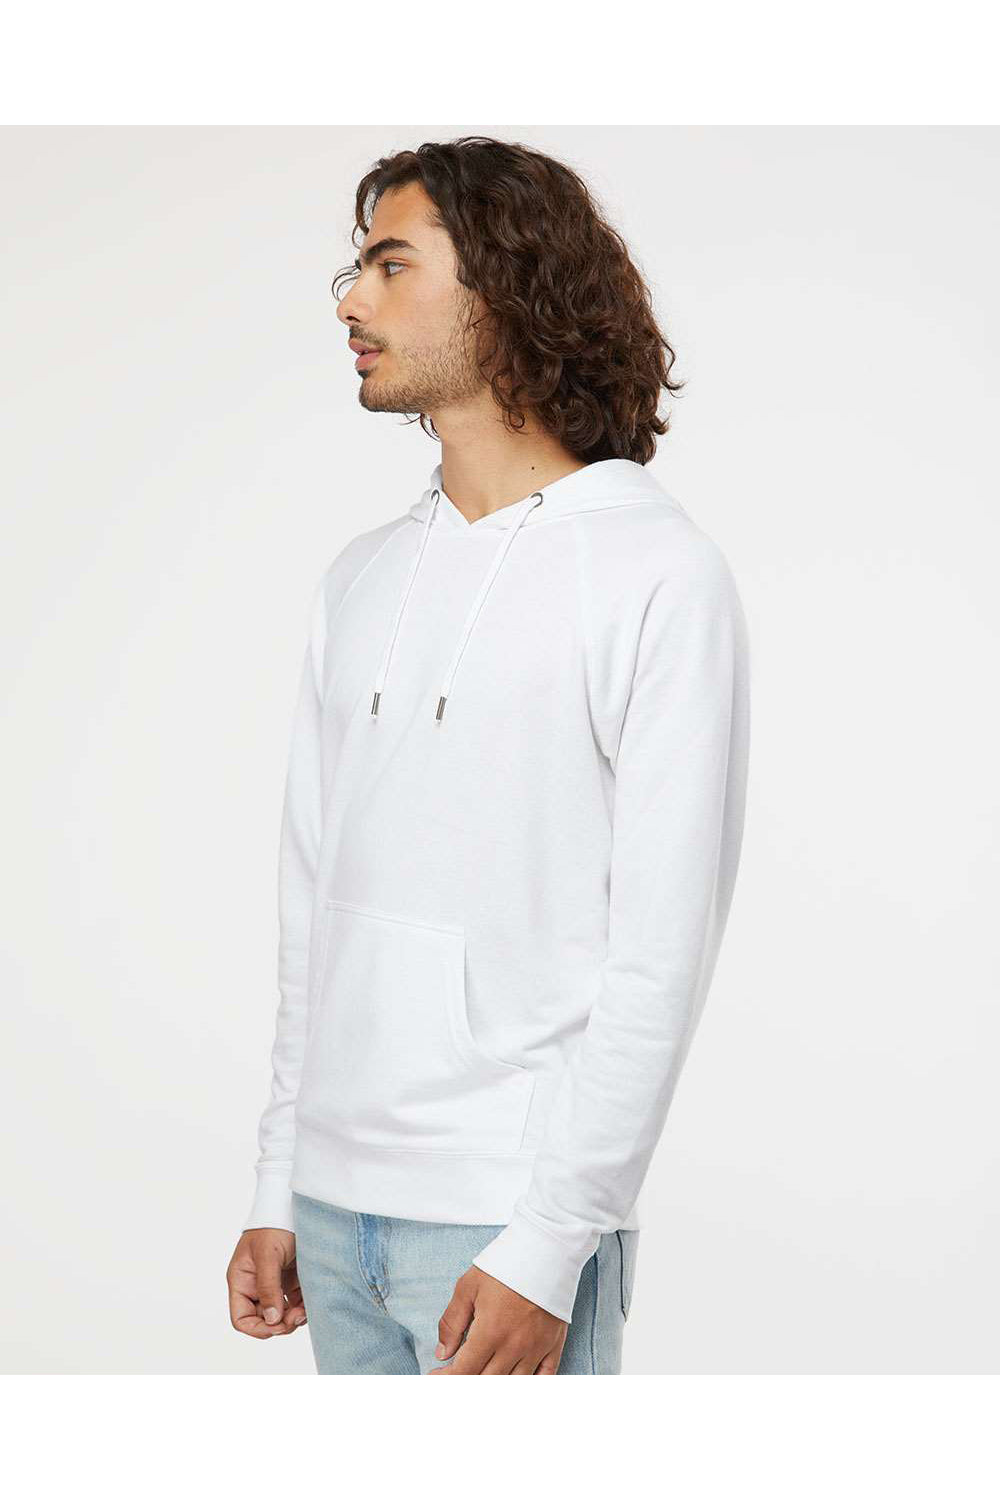 Independent Trading Co. SS1000 Mens Icon Loopback Terry Hooded Sweatshirt Hoodie White Model Side